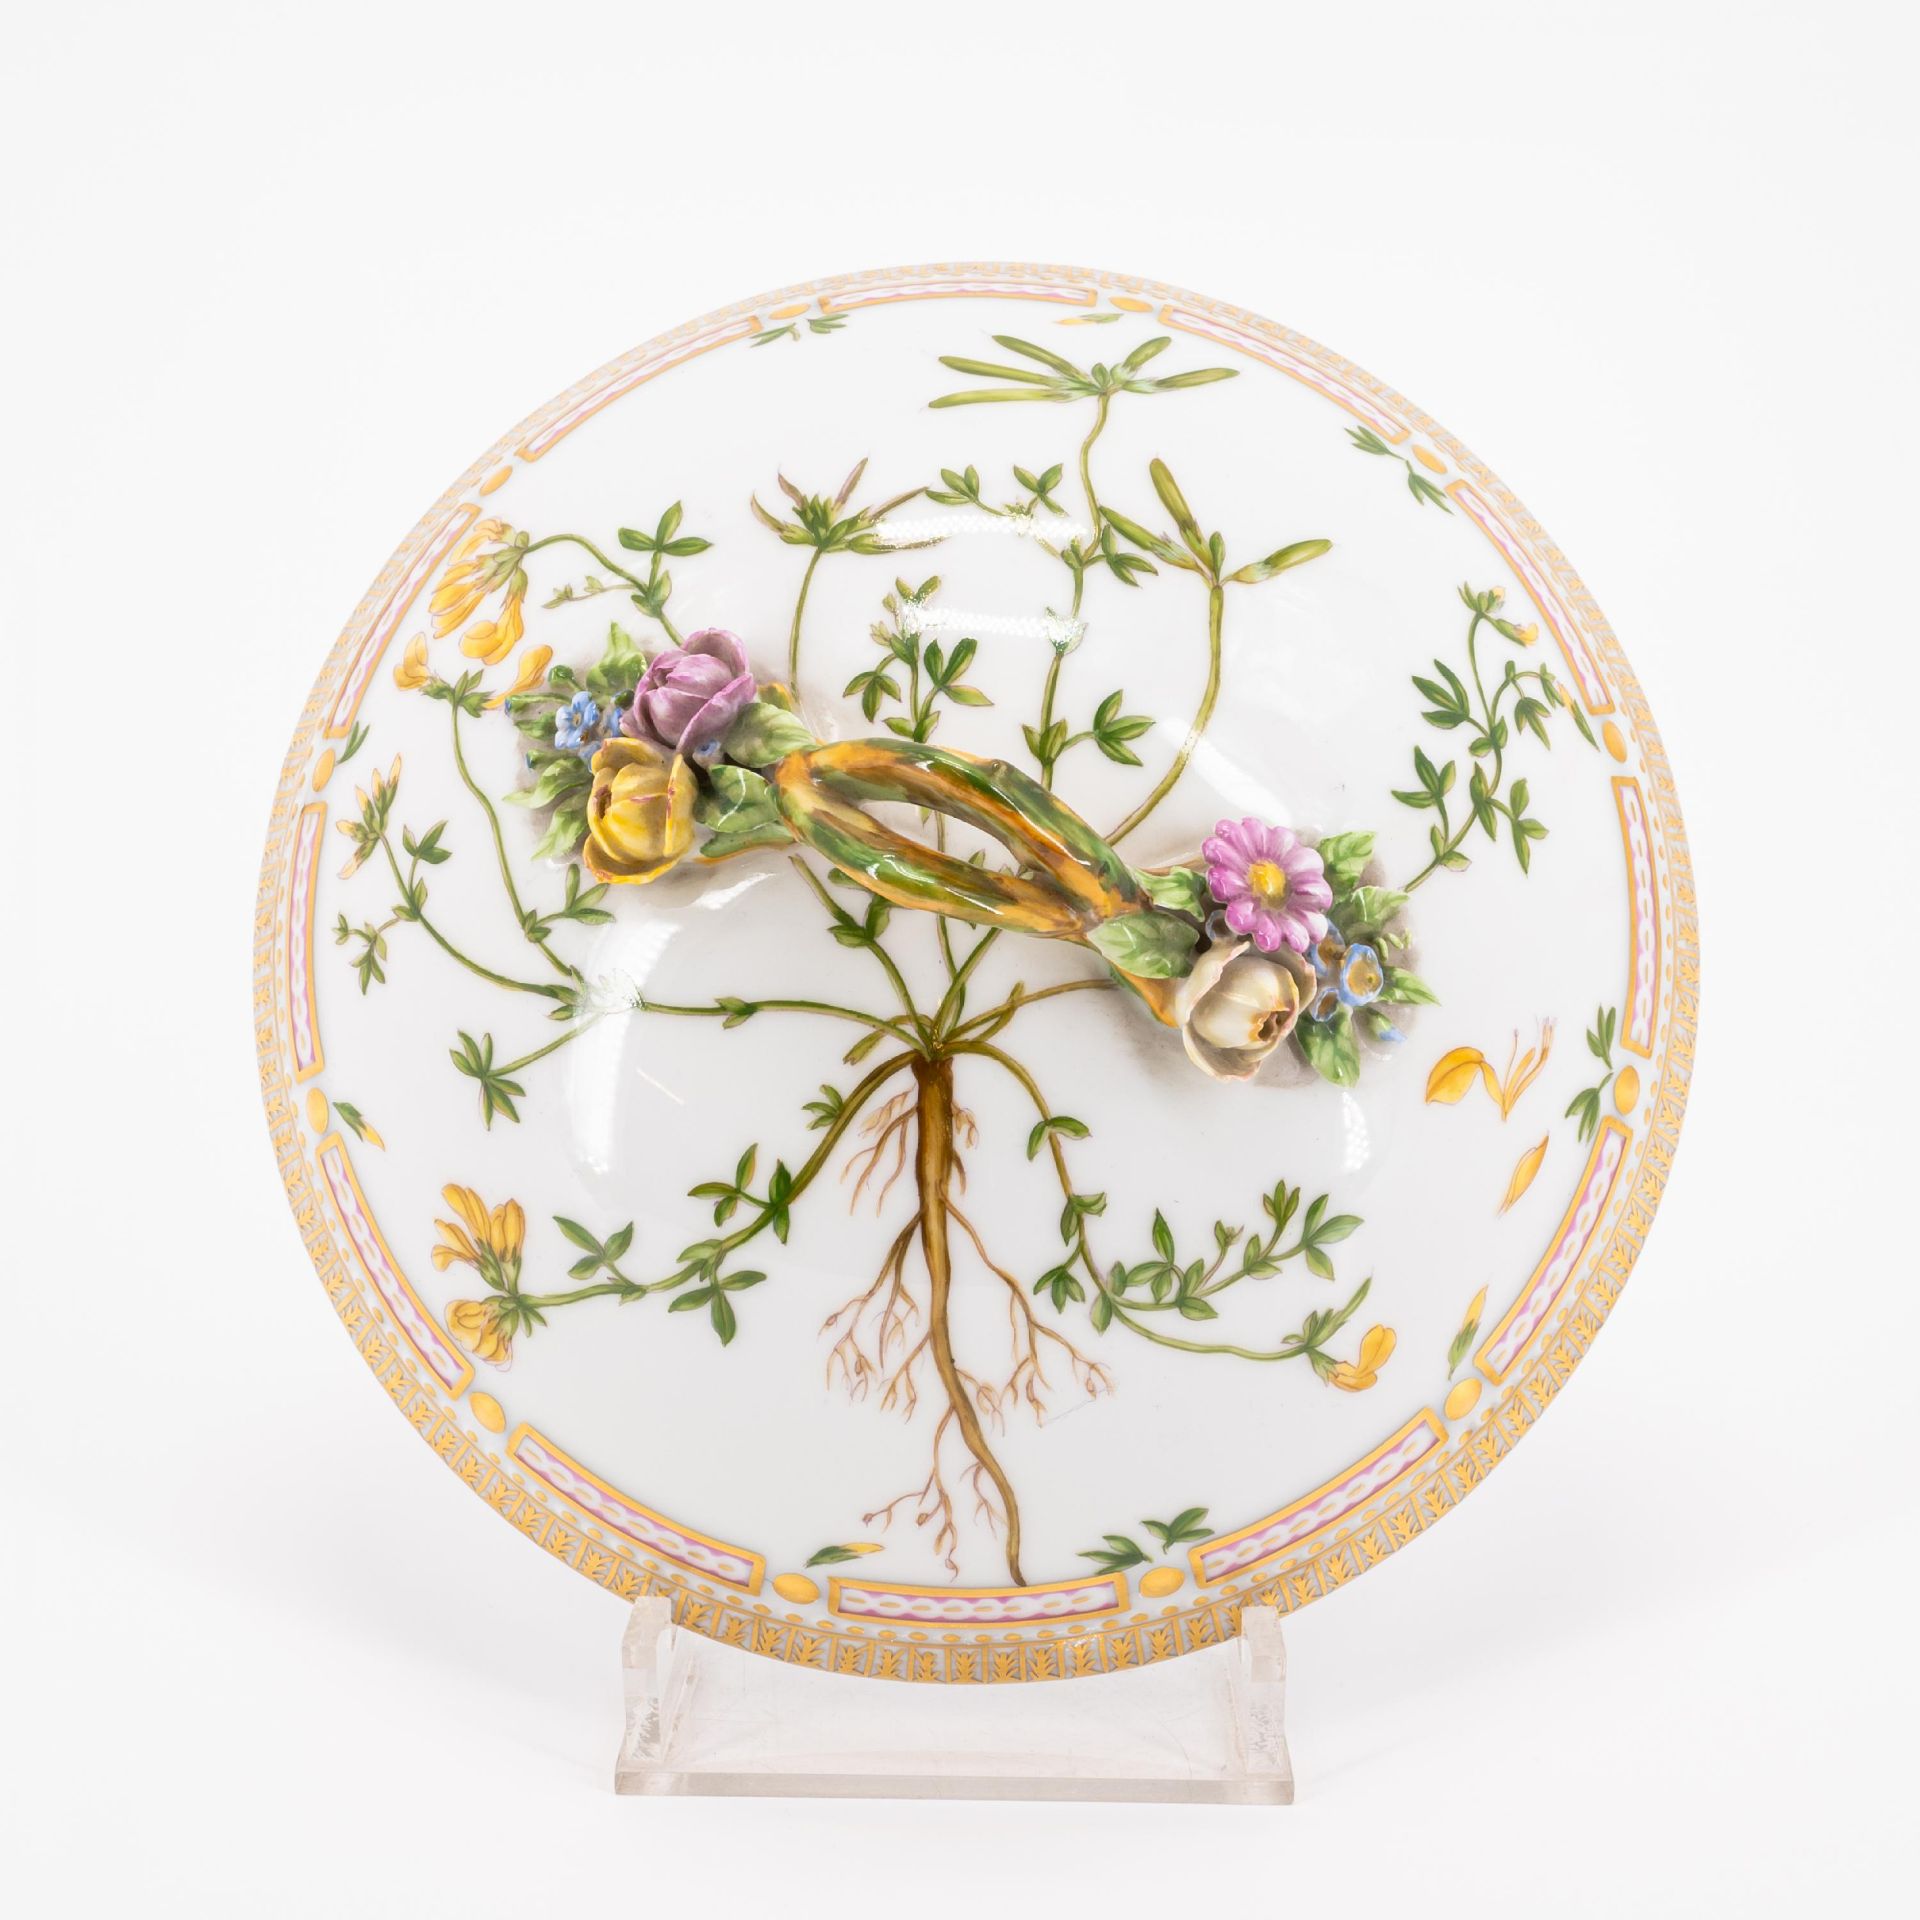 18 PIECES FROM A PORCELAIN DINNER SERVICE 'FLORA DANICA' - Image 20 of 26